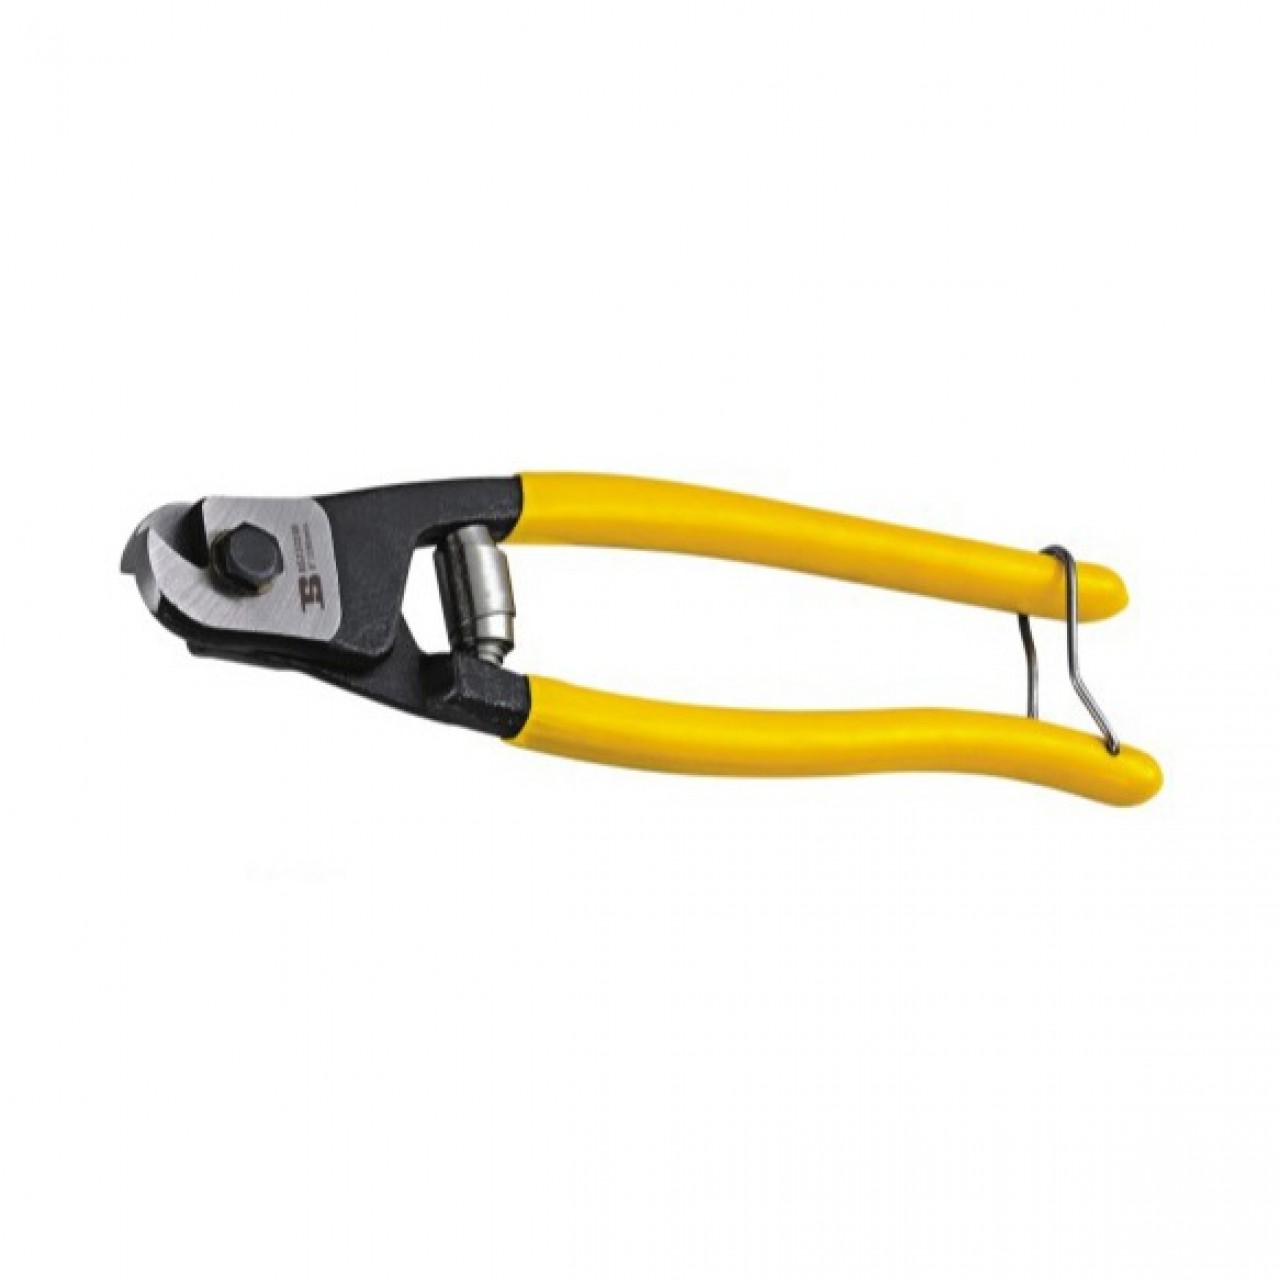 BOSI Spring Wire Cutter & Wire Rope BS232268 - 8"/200MM